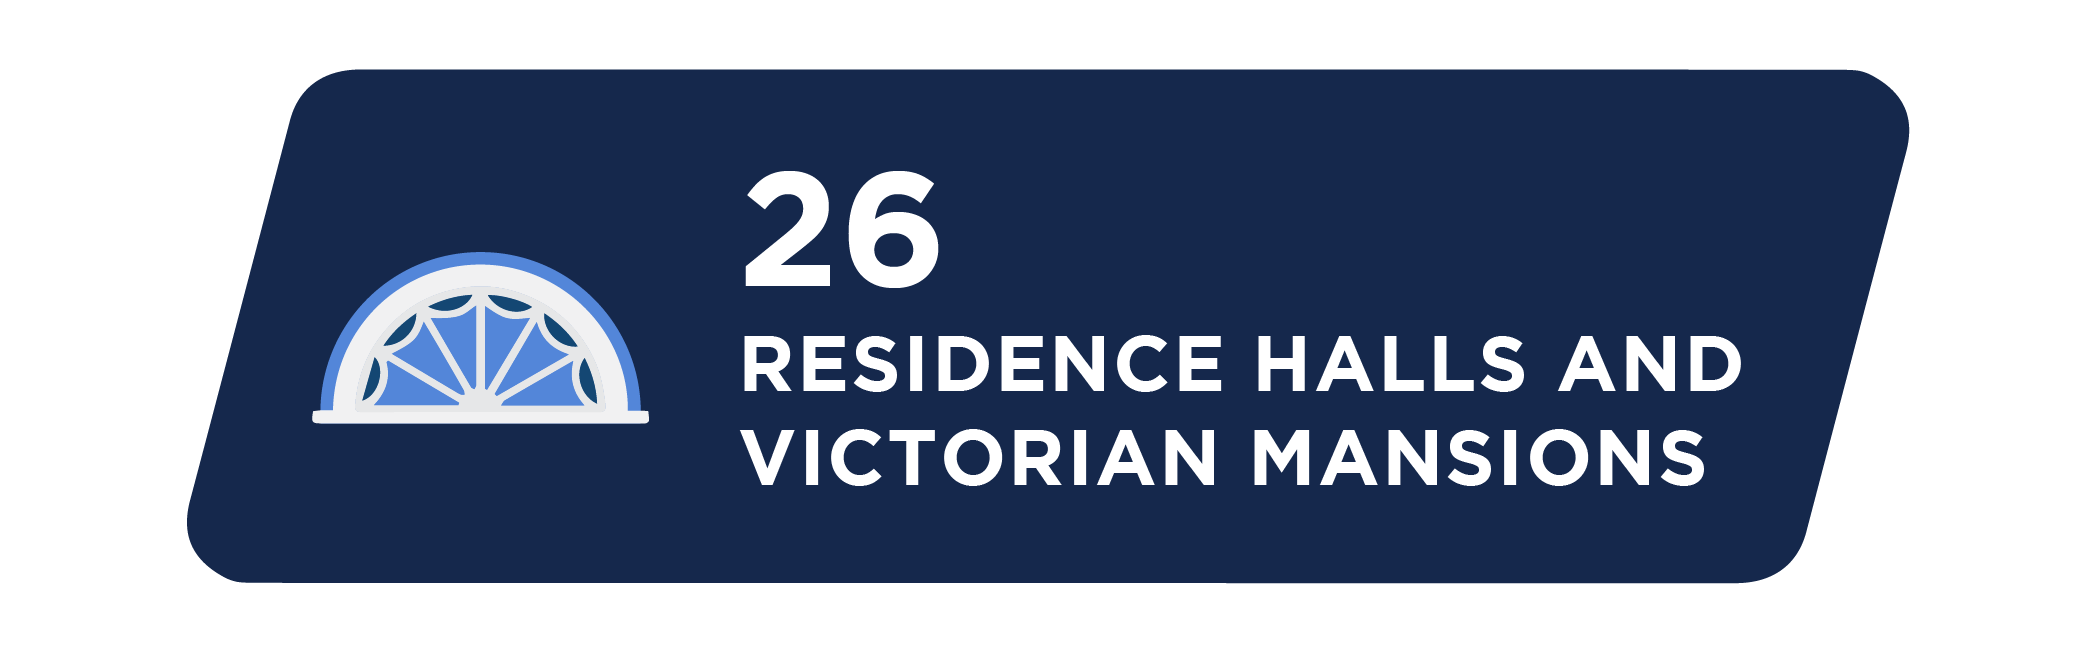 27 residence halls and Victorian mansions